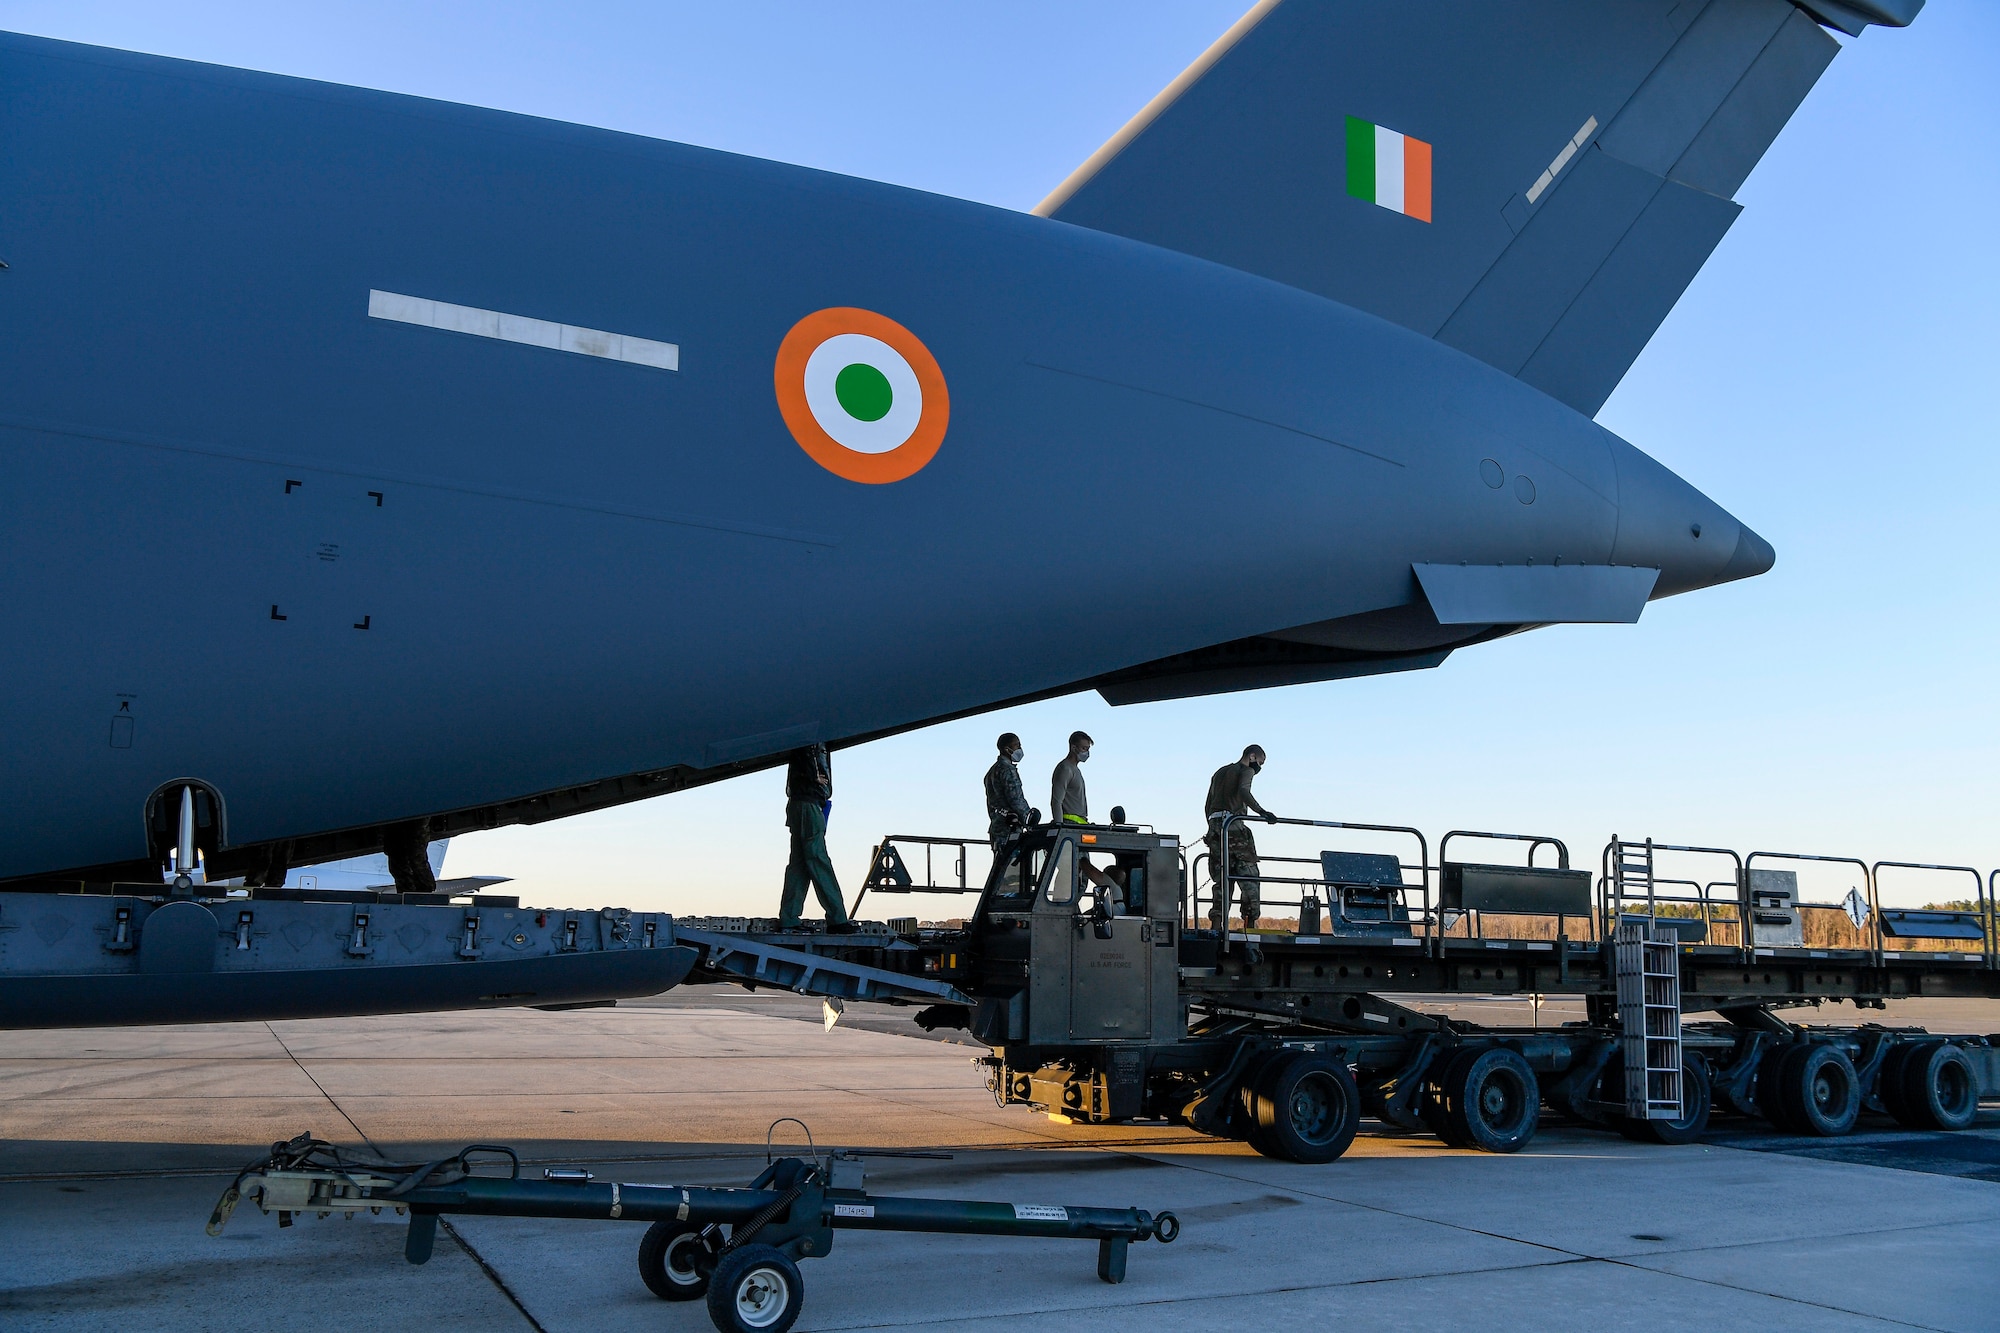 The sun sets on a Indian air force C-17 Globemaster III during an foreign military sales operation at Dover Air Force Base, Delaware, Nov. 20, 2020. The U.S. strengthens its international partnerships through foreign military sales. Dover AFB actively supports $3.5 billion worth of FMS due to its strategic location and 436th Aerial Port Squadron, the largest aerial port in the Department of Defense. As the world’s oldest and largest democracies, the United States and India share a commitment to freedom, human rights and rule of law. (U.S. Air Force photo by Senior Airman Christopher Quail)